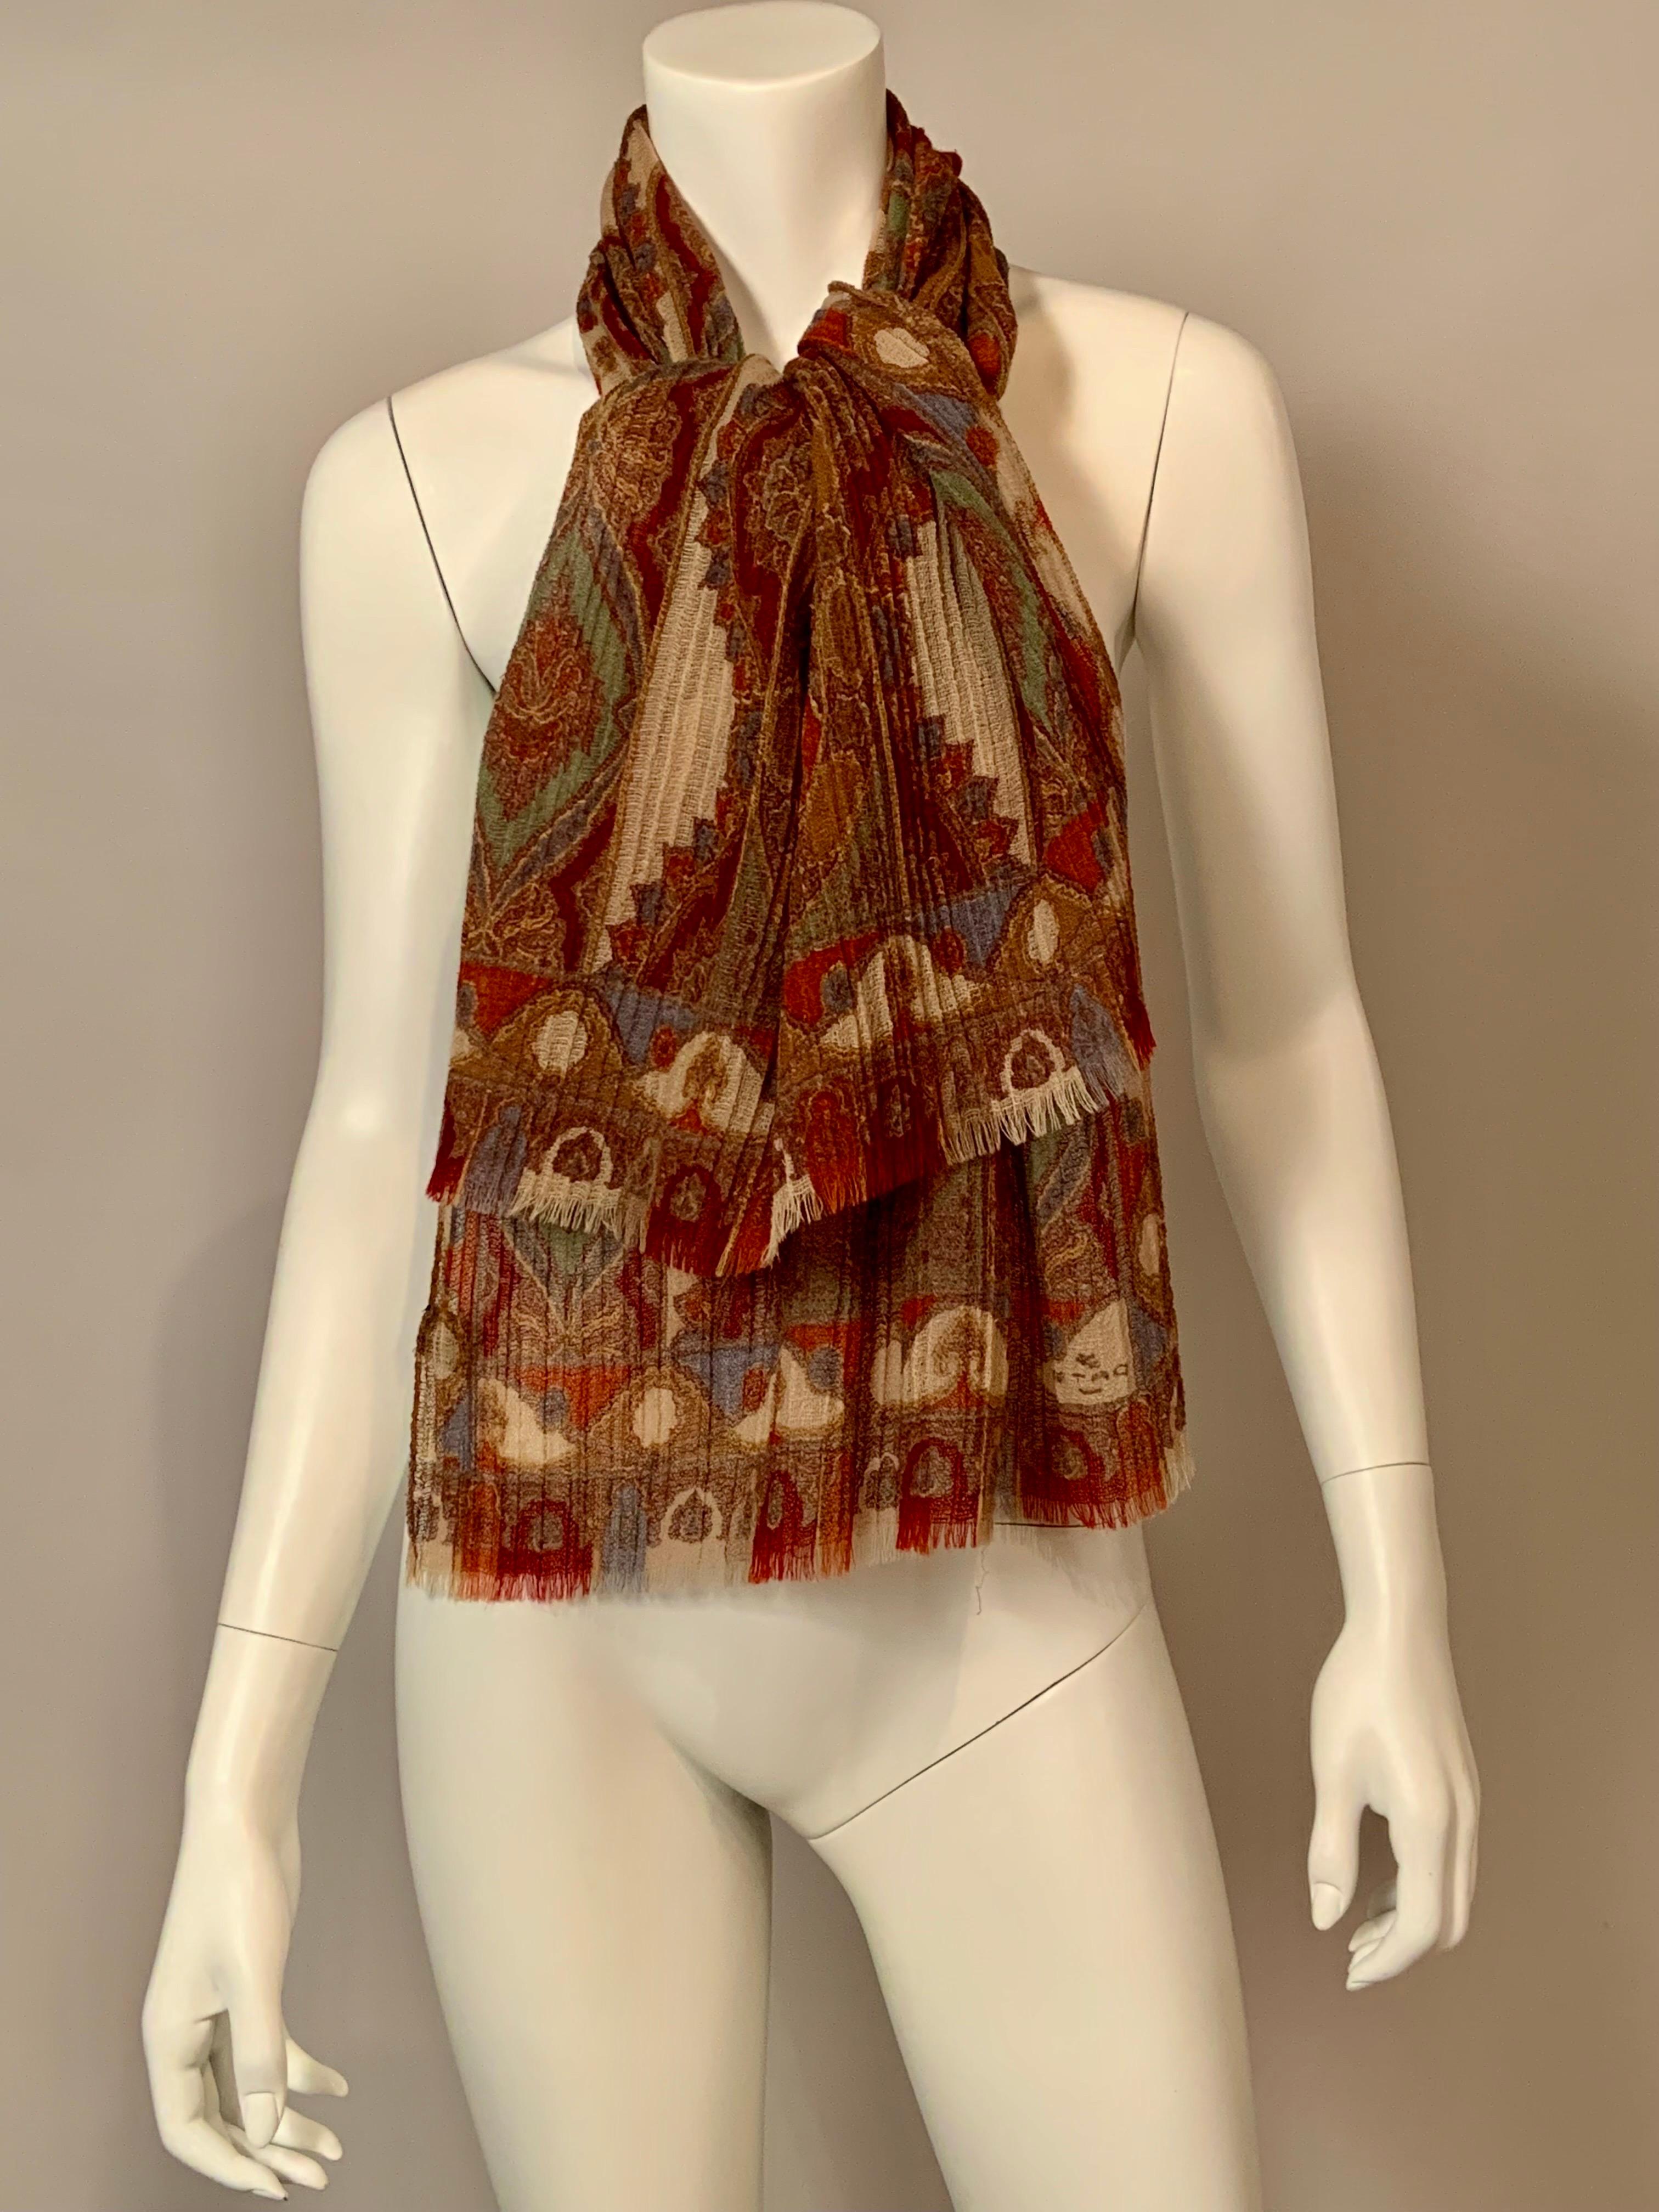 Etro is almost synonymous with paisley but they have managed to add extra interest to this piece by pleating the sheer wool fabric used for this scarf which can double as a shawl. There is a cream background with shades of blue, green, coral, taupe,